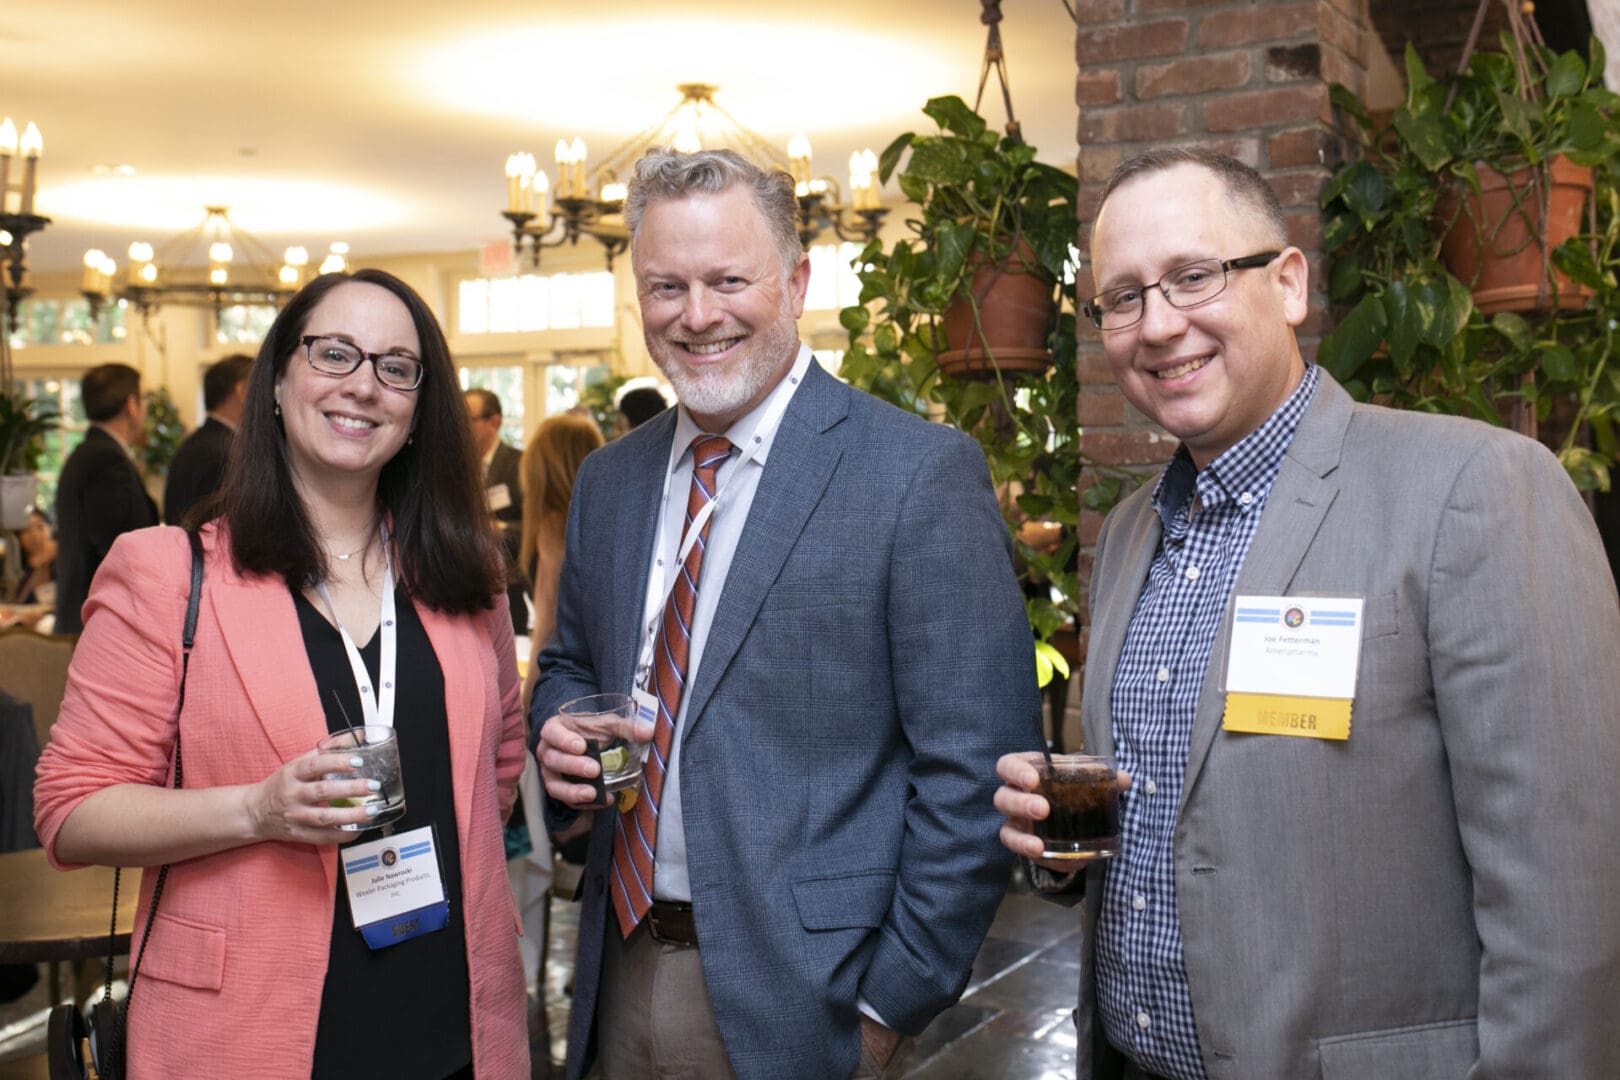 Three people smiling at an event with drinks in their hands.